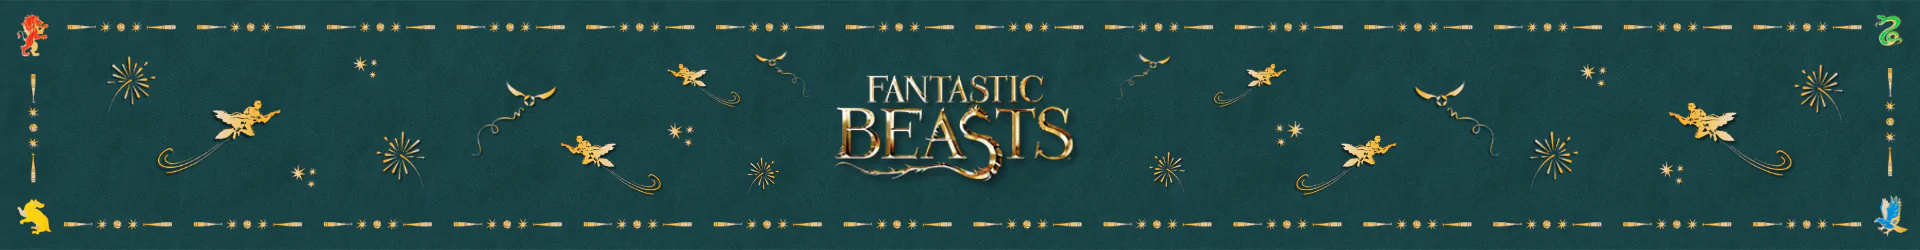 Fantastic Beasts and Where to Find Them mugs banner